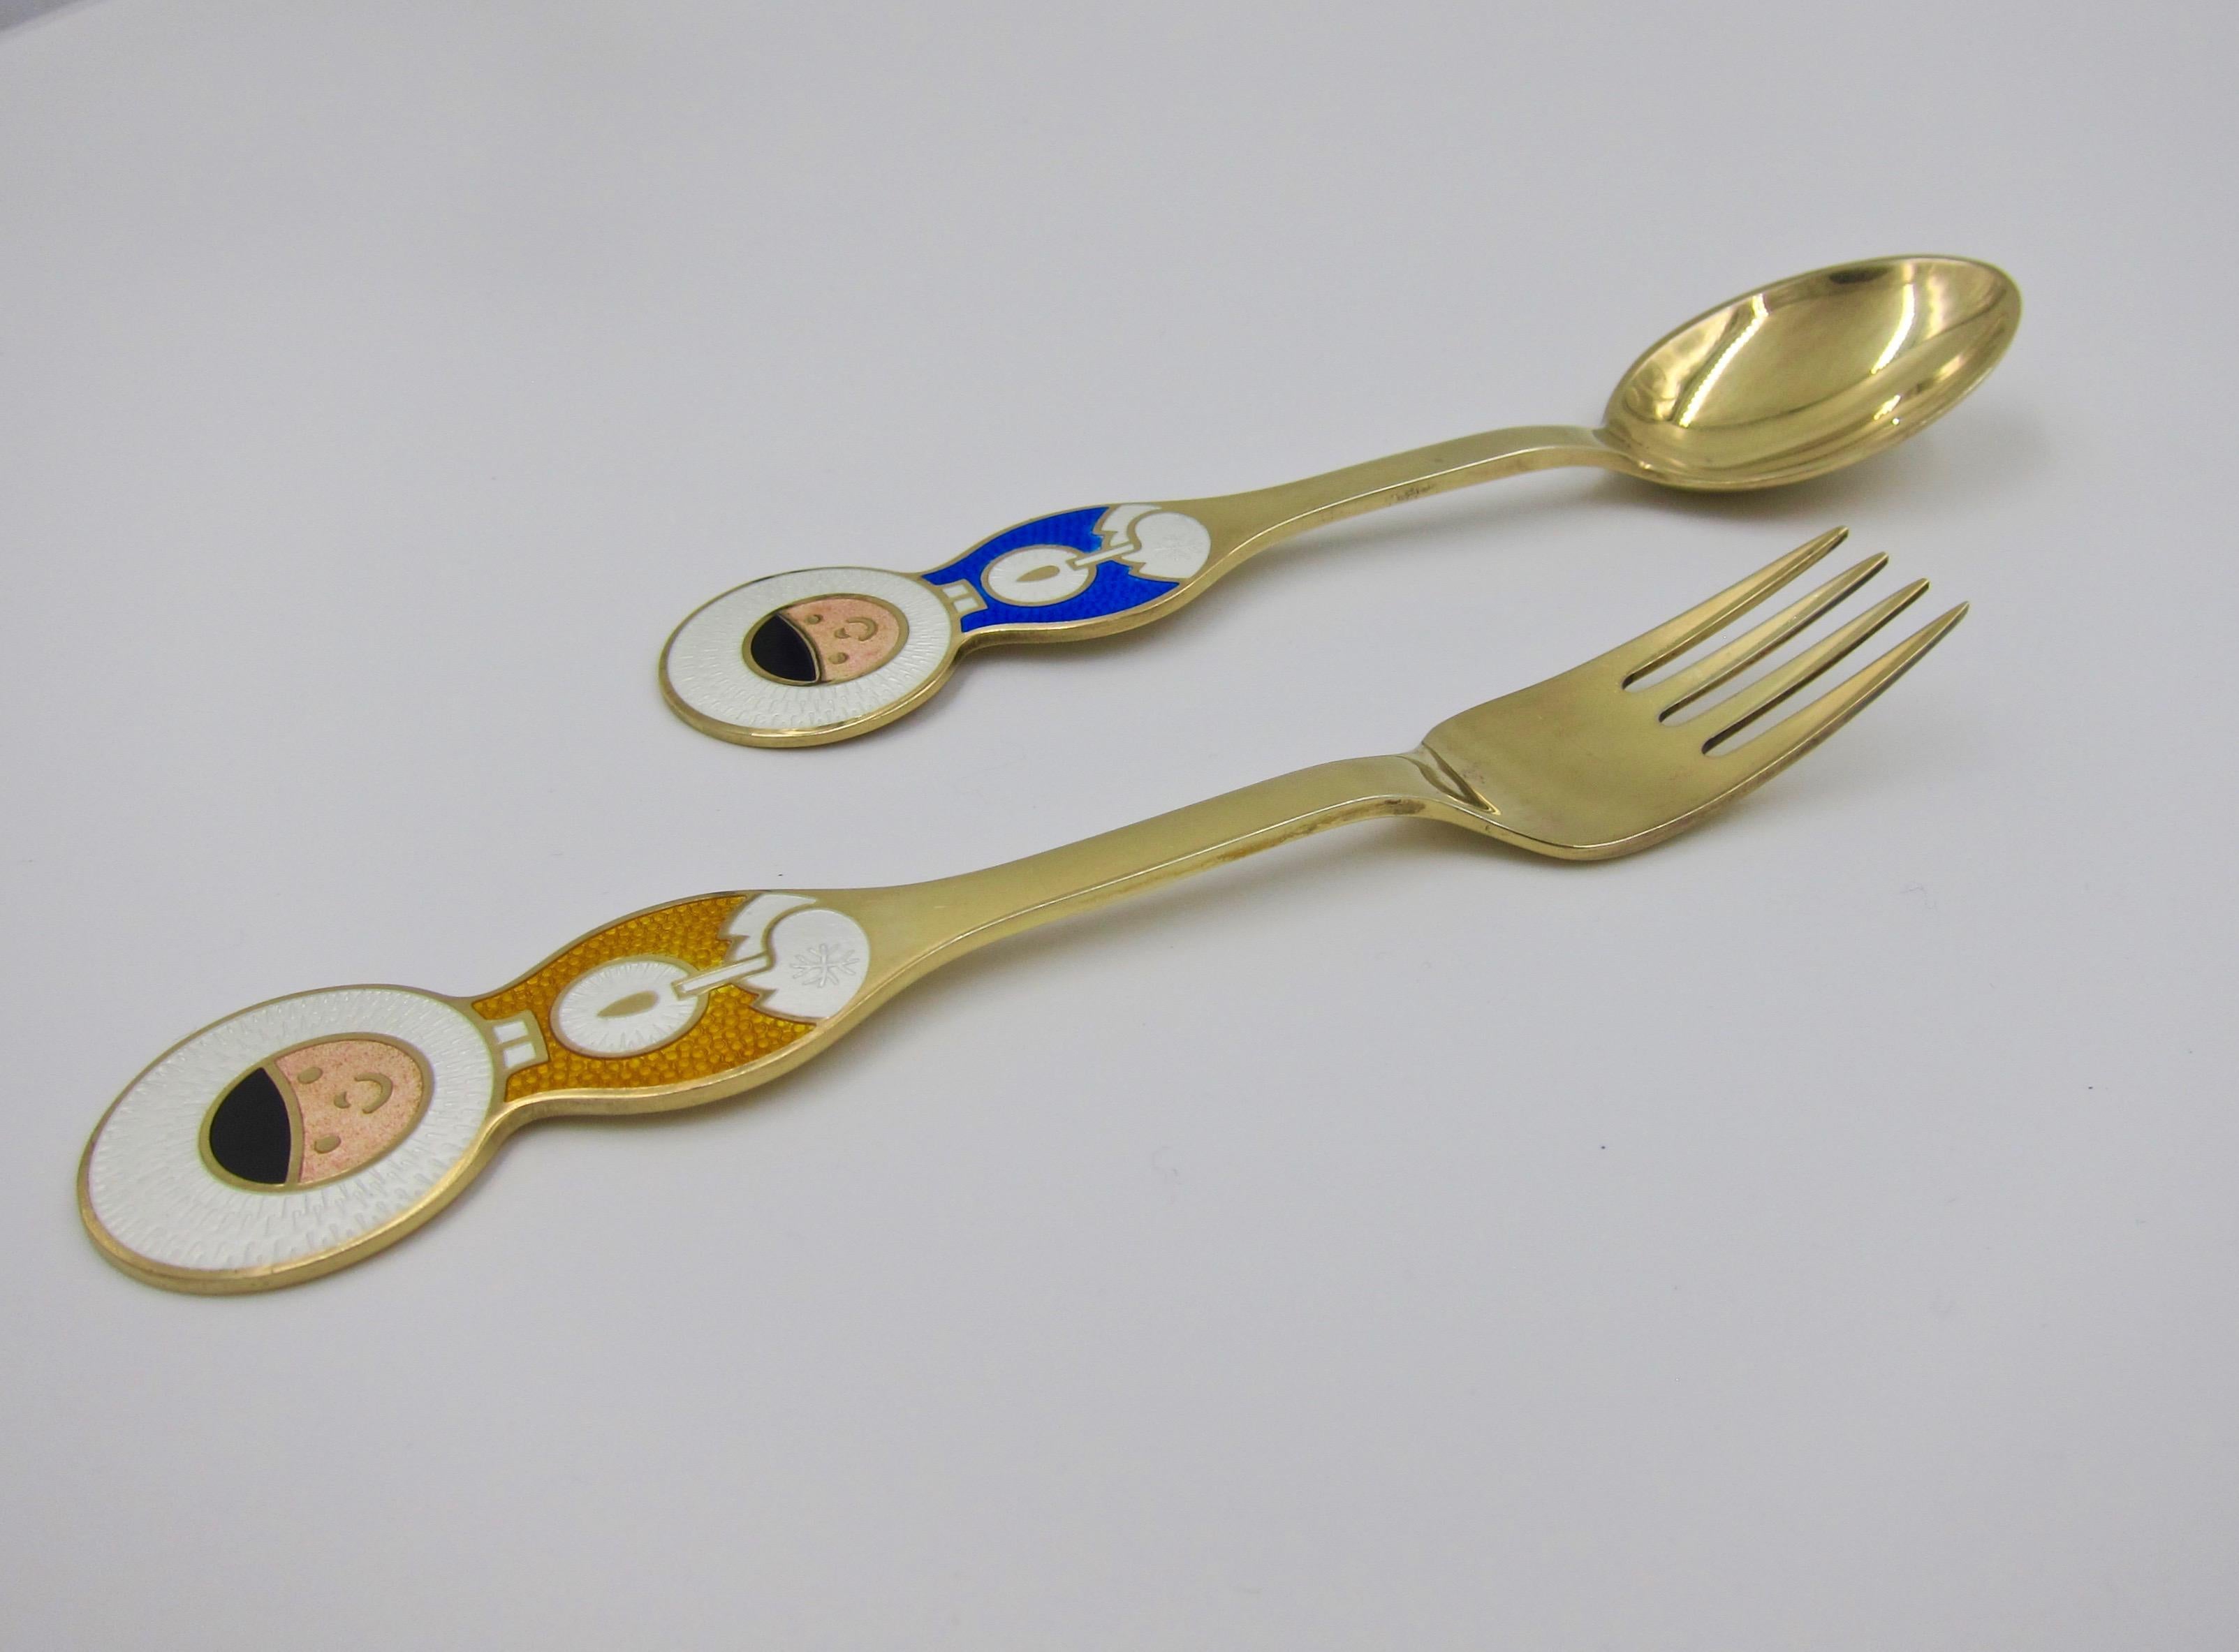 1969 Anton Michelsen Gilt Silver and Enamel Christmas Fork and Spoon Set 3